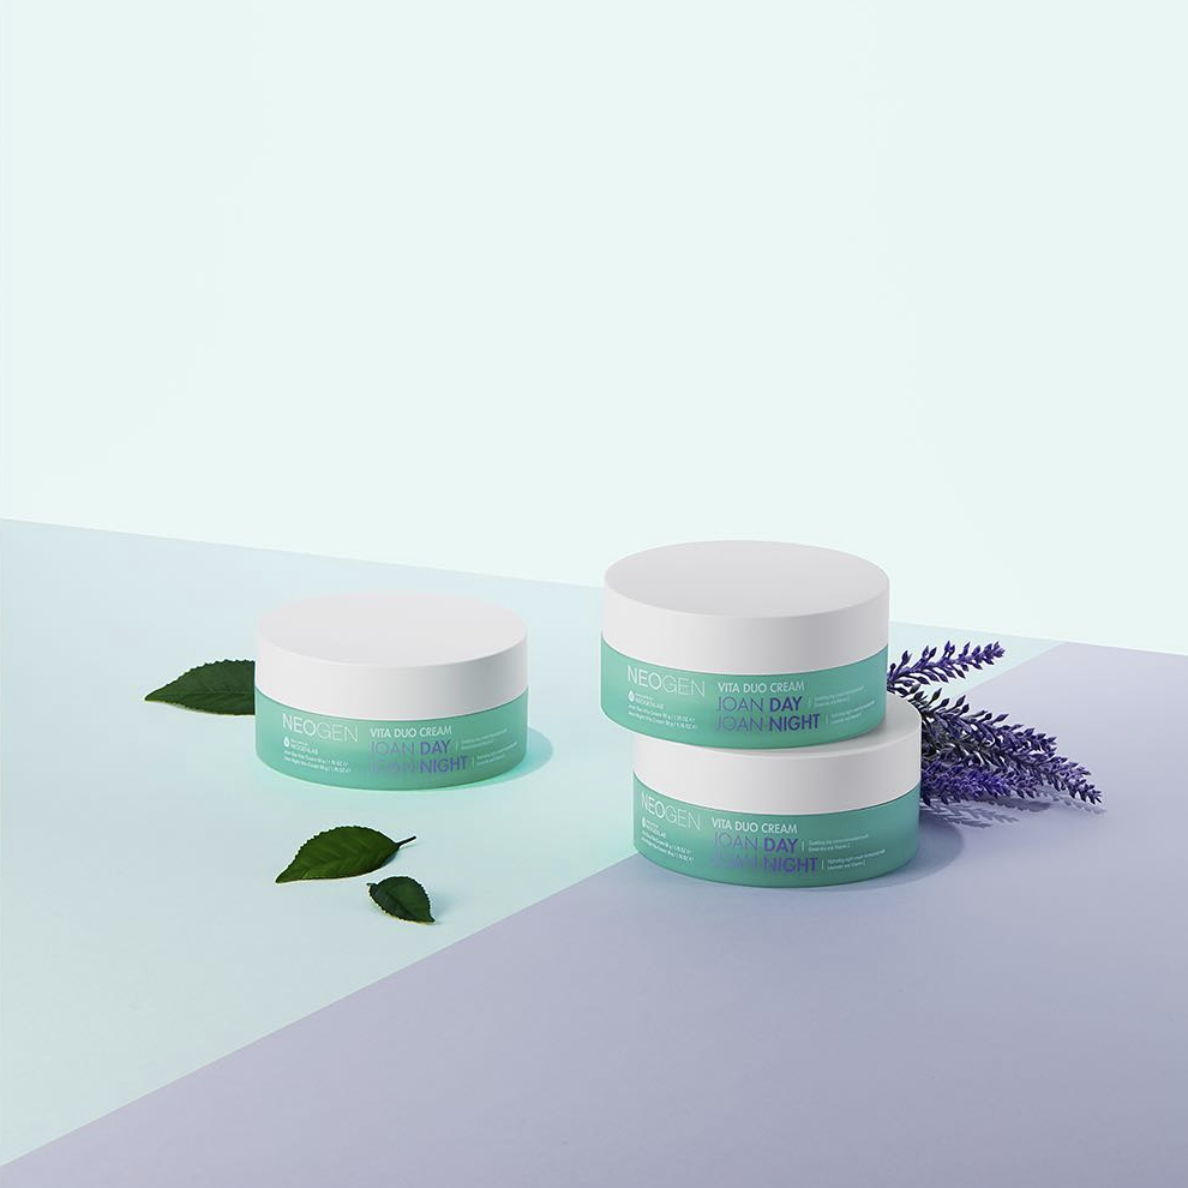 NEO I SPOTLIGHT<br> Joan Day - Joan Night: The Dual Cream your skin needs for all-day care - NEOGEN GLOBAL